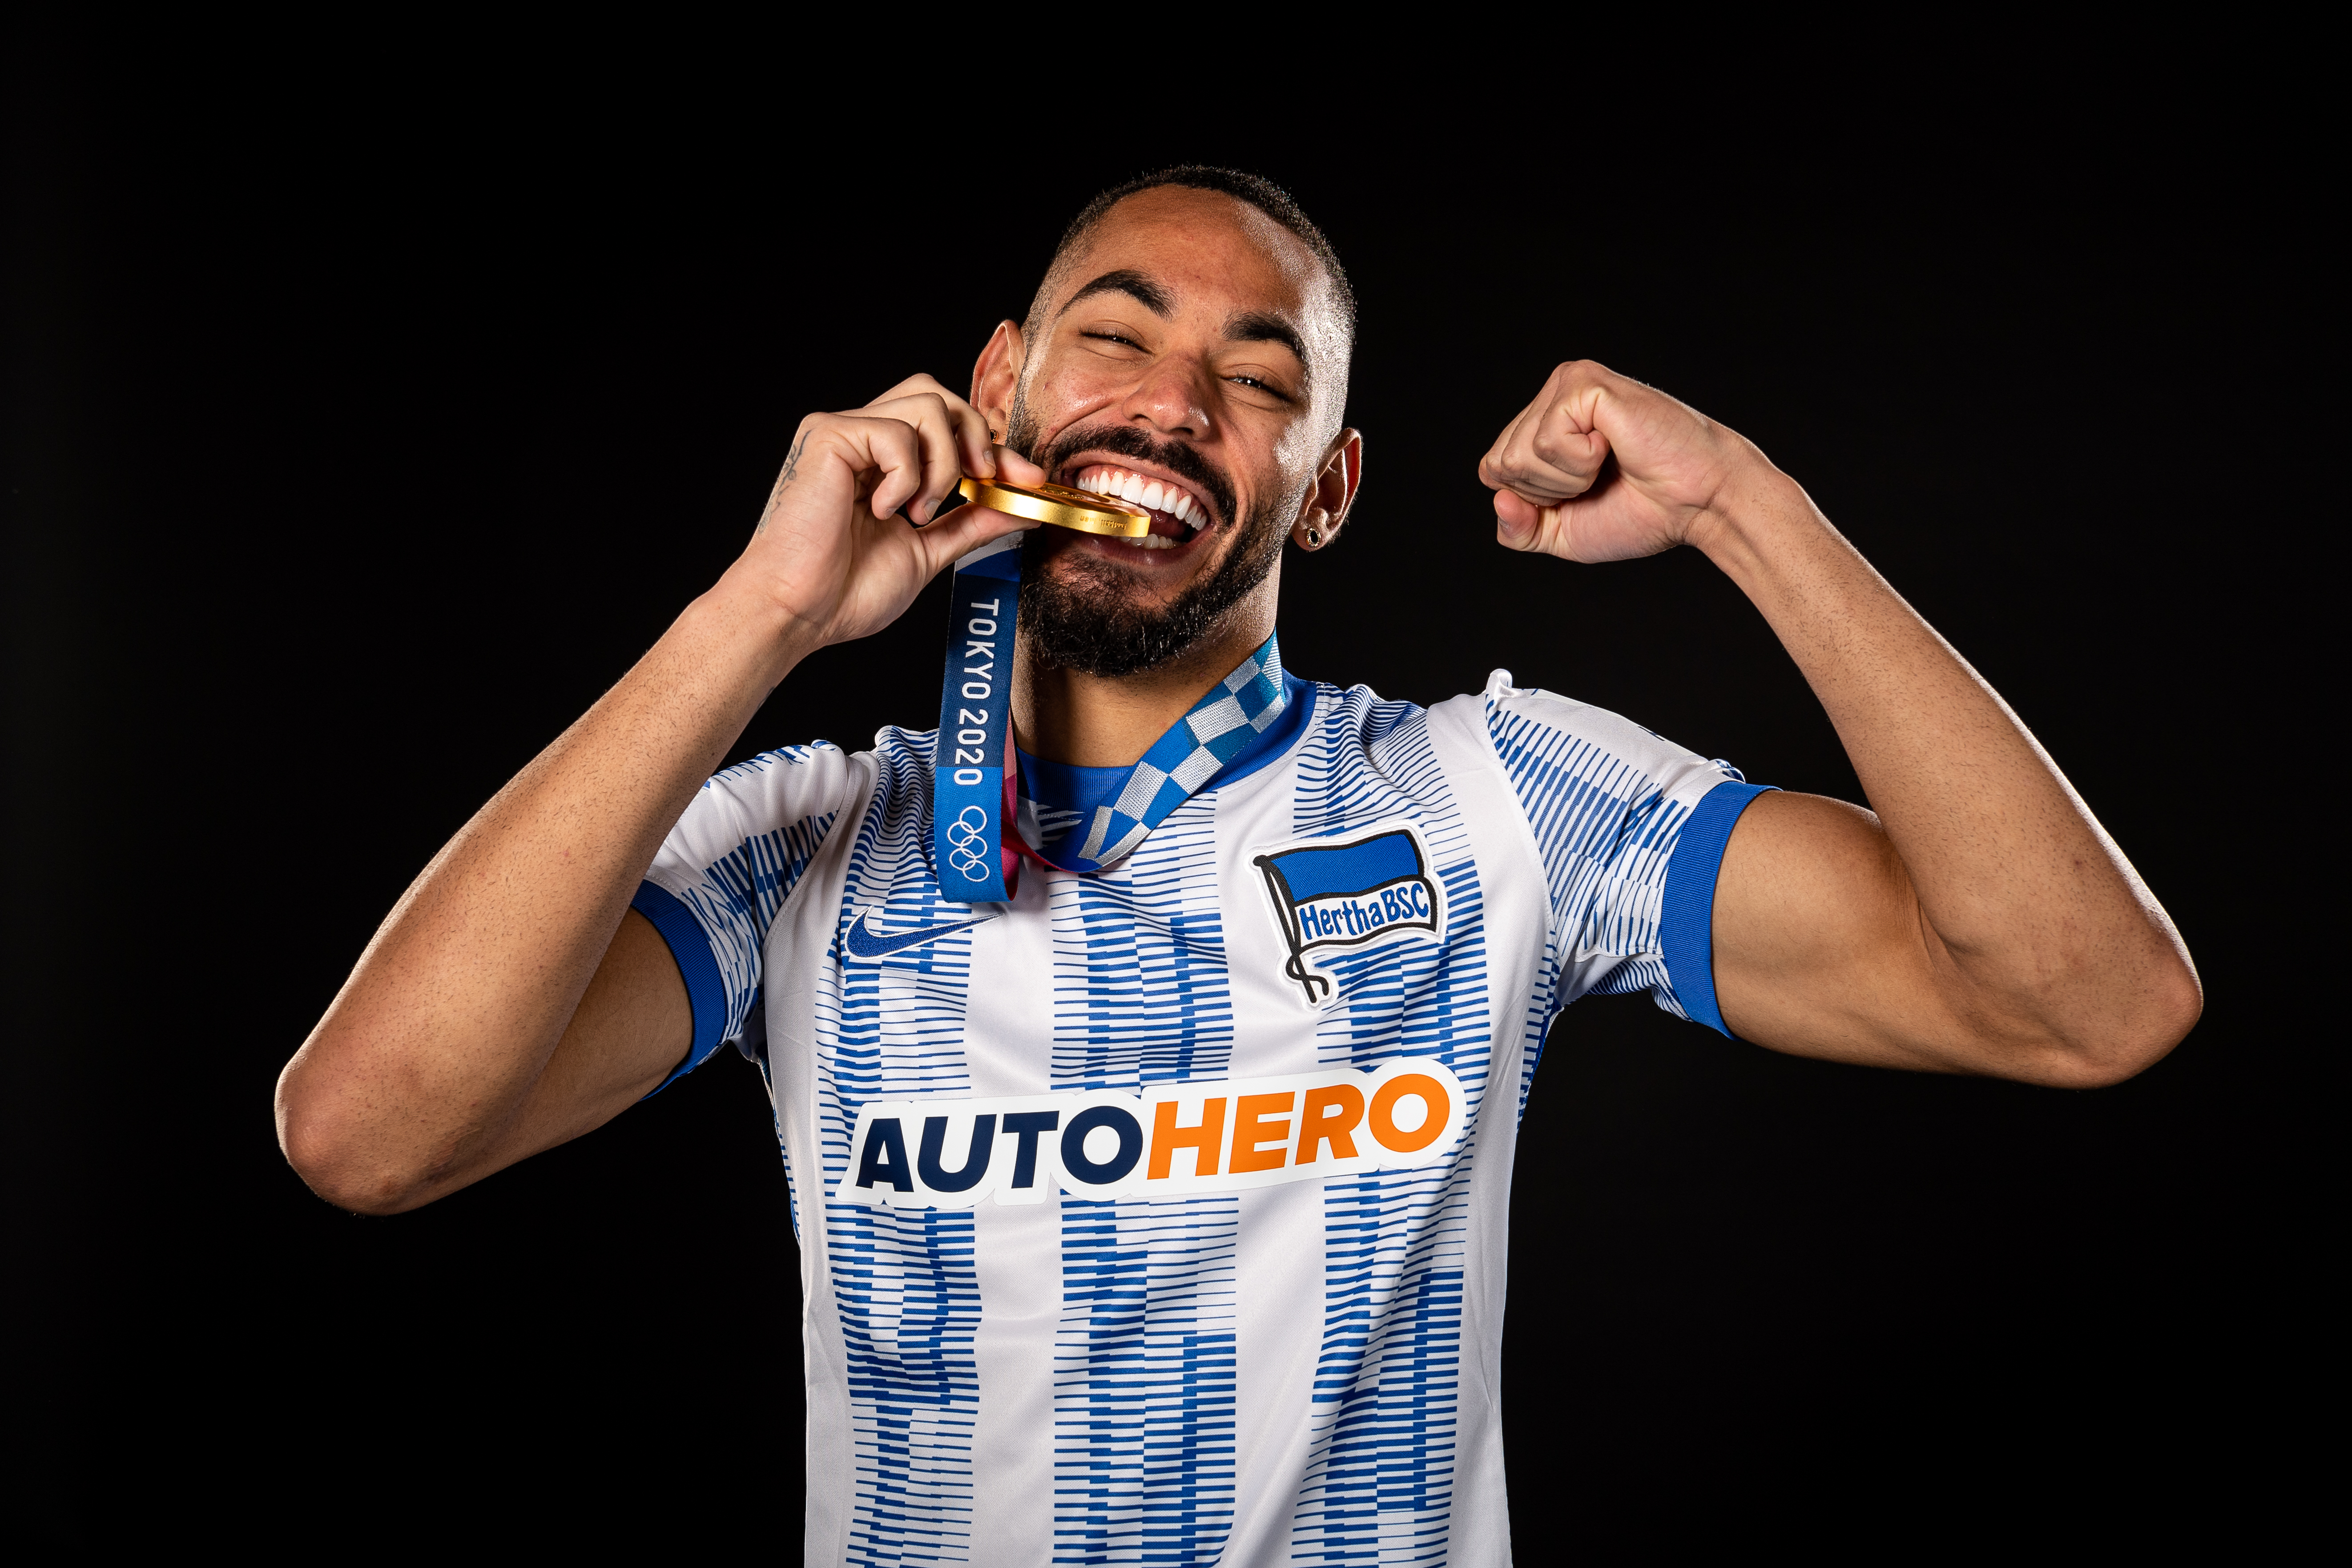 Matheus Cunha shows off his gold medal in the Hertha kit.